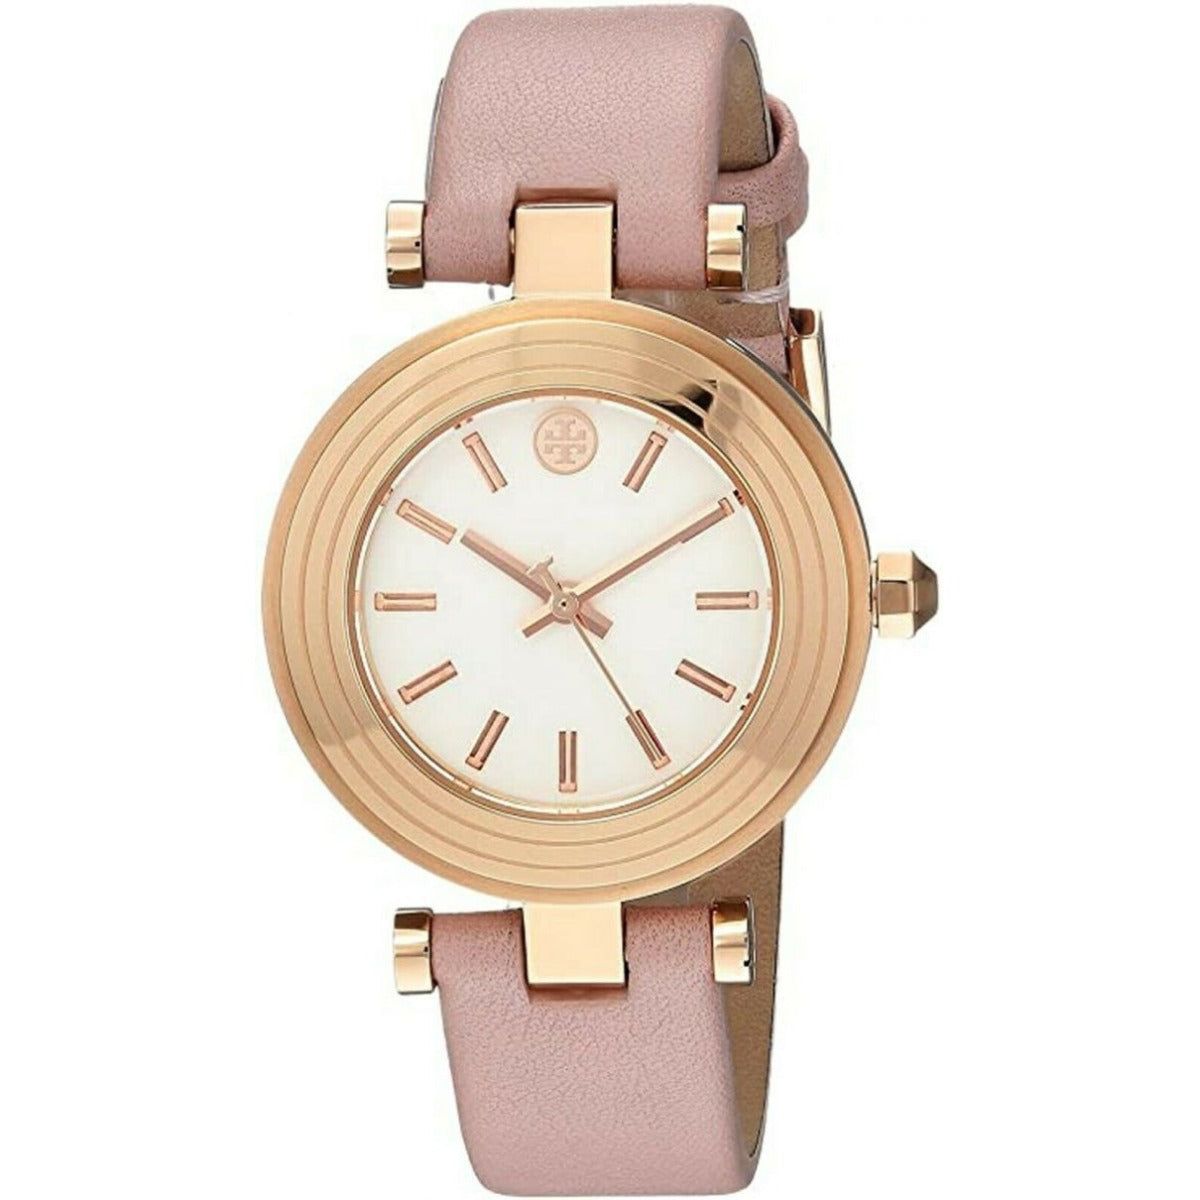 TORY BURCH TBW9008 CLASSIC T ROSE GOLD PINK LEATHER WOMEN'S WATCH